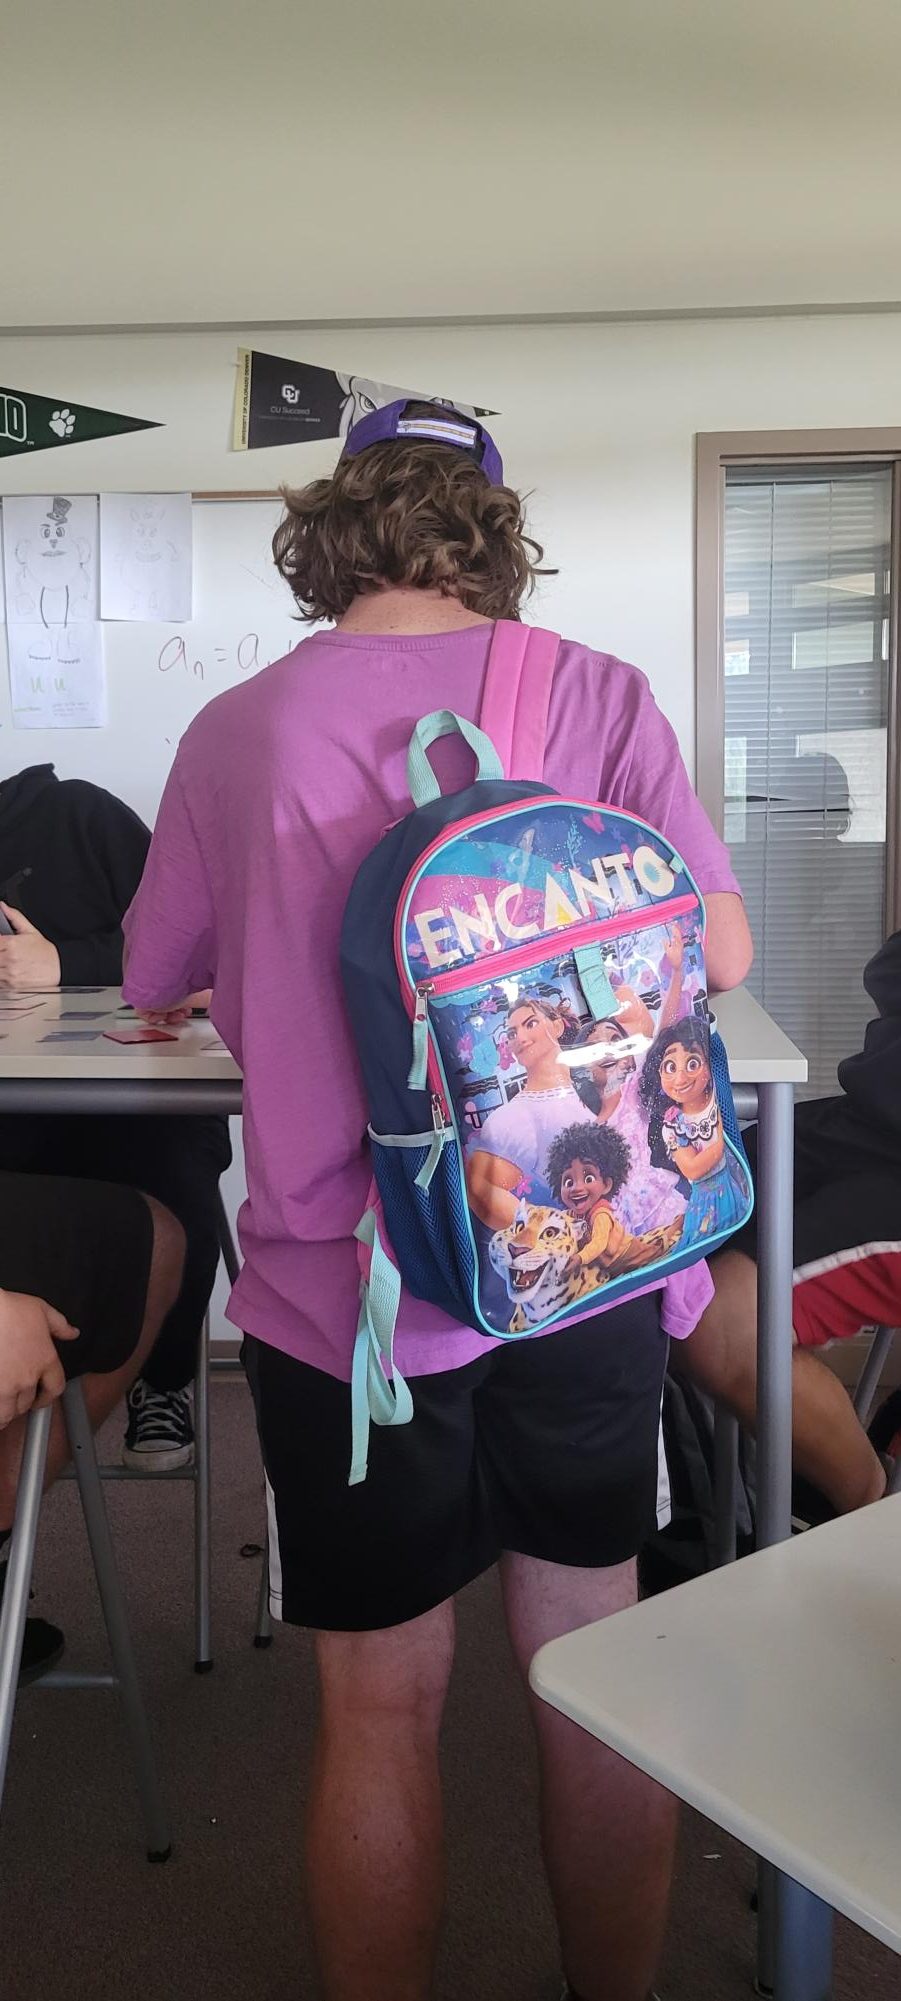 Senior Hayden Hinton at the beginning of the school day in Lobo Lab sports a child-sized backpack that displays characters from the Disney film “Encanto”. These small backpacks vary in color and appearance, but one constant seems to be that the school bag must be several sizes too small for its wearer.